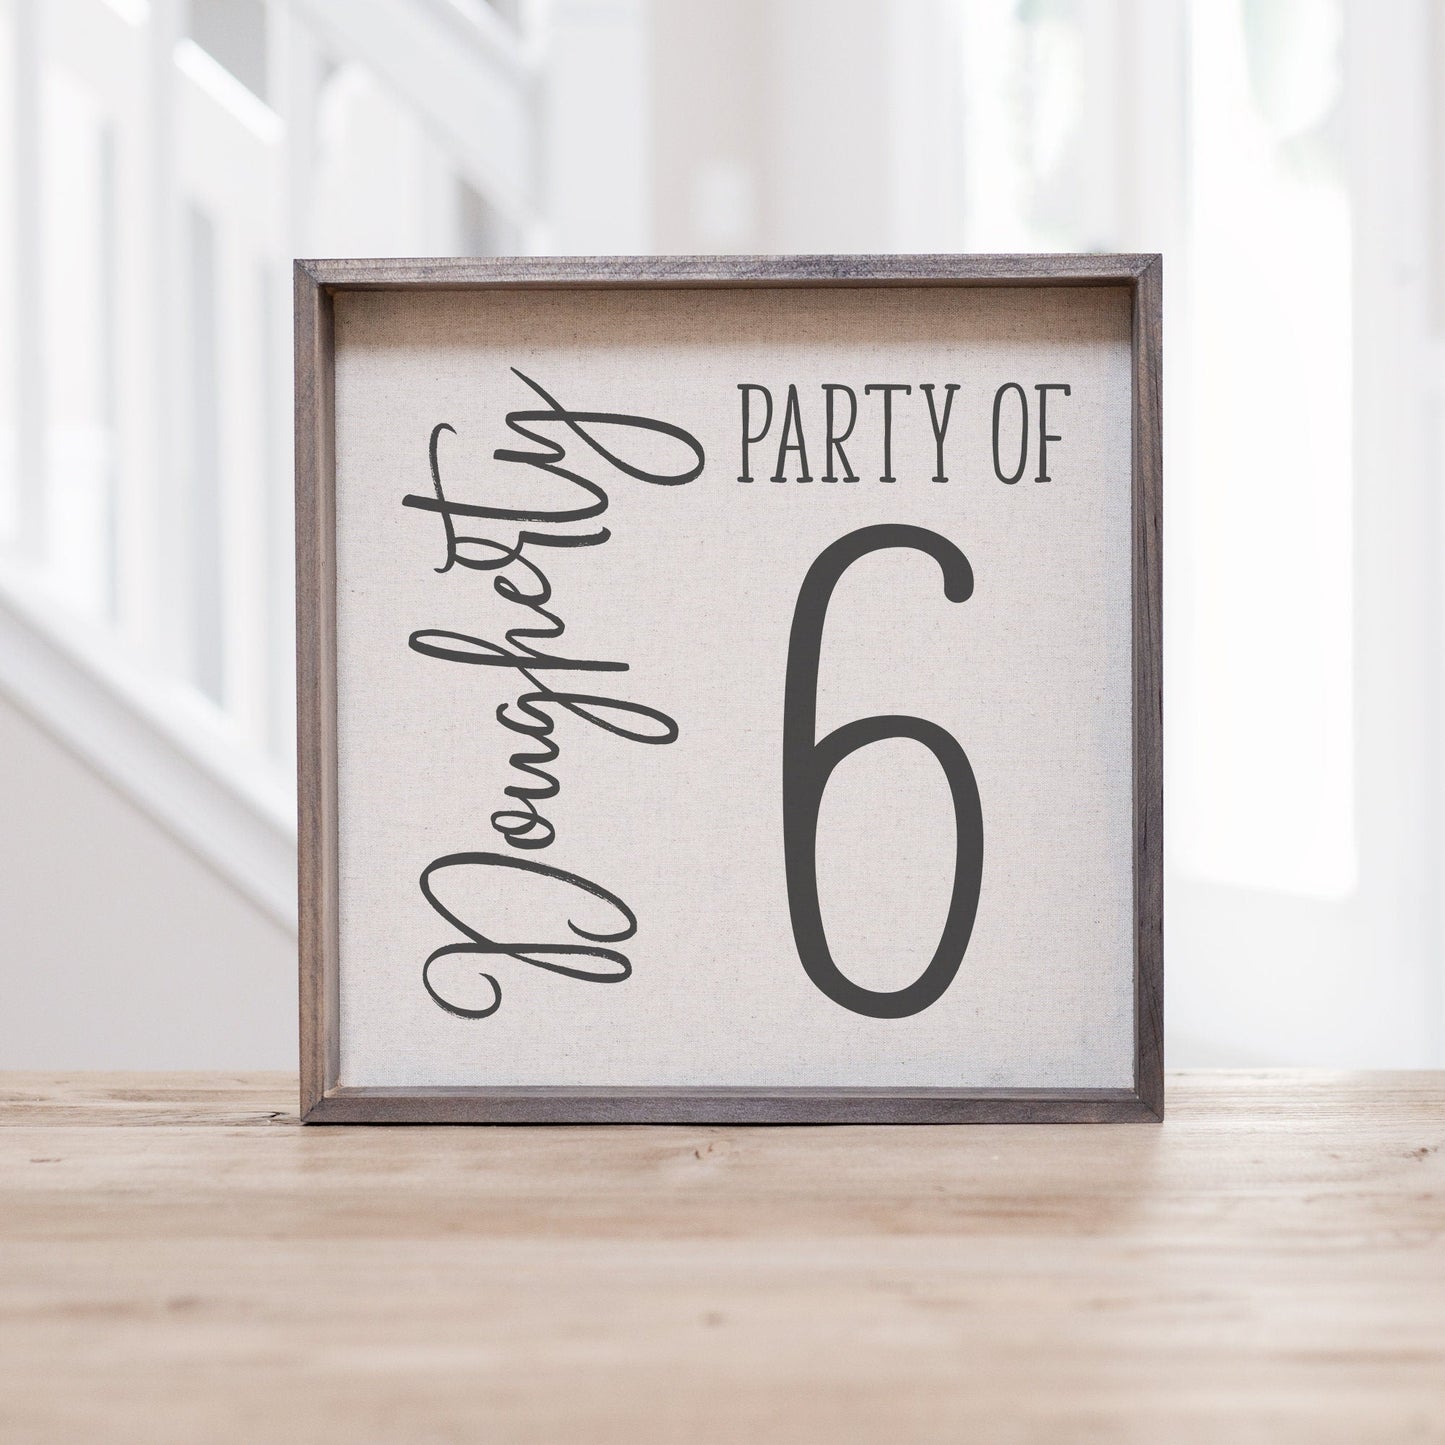 Load image into Gallery viewer, Party of Family Sign | Party of 6 Sign | Gallery Wall Decor | Pregnancy Announcement | Family Number Sign | Personalized Housewarming Gift
